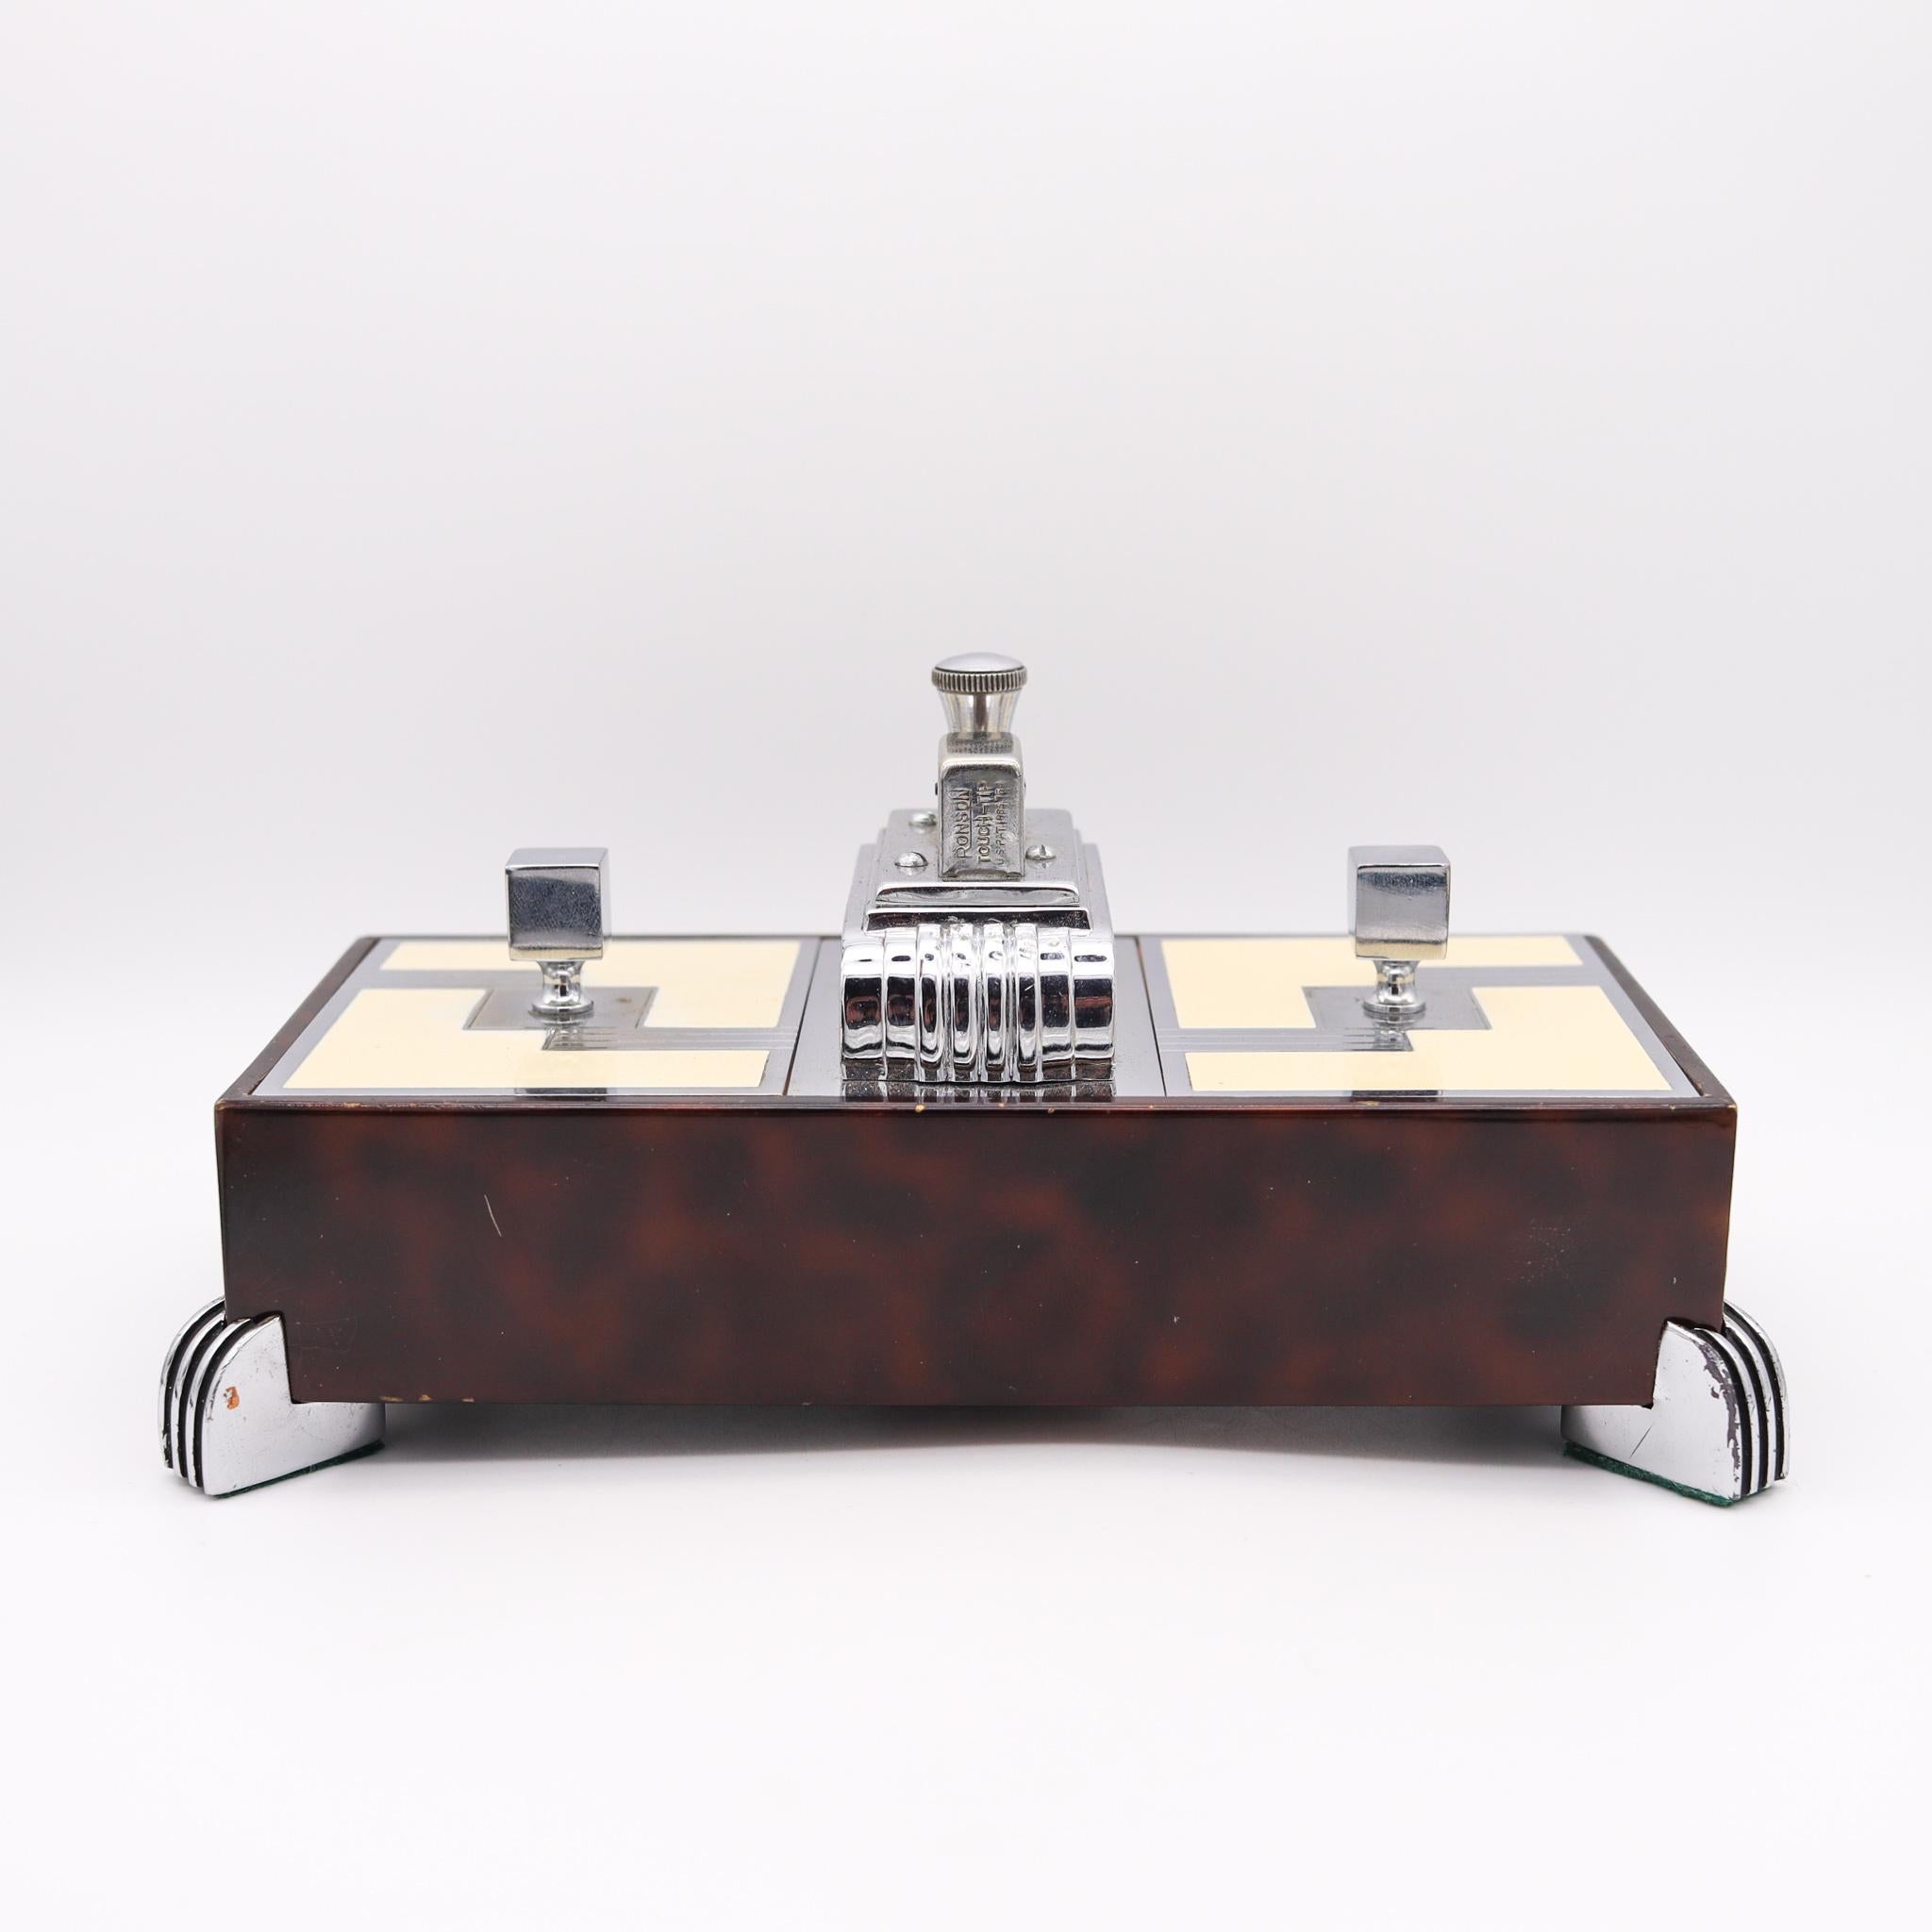 Desk double box with lighter designed by Ronson.

An exceptional and very beautiful desk box, created in New Jersey United States by The Ronson Co. during the art deco period, back in the 1935. This is a rare double box with two lids with square